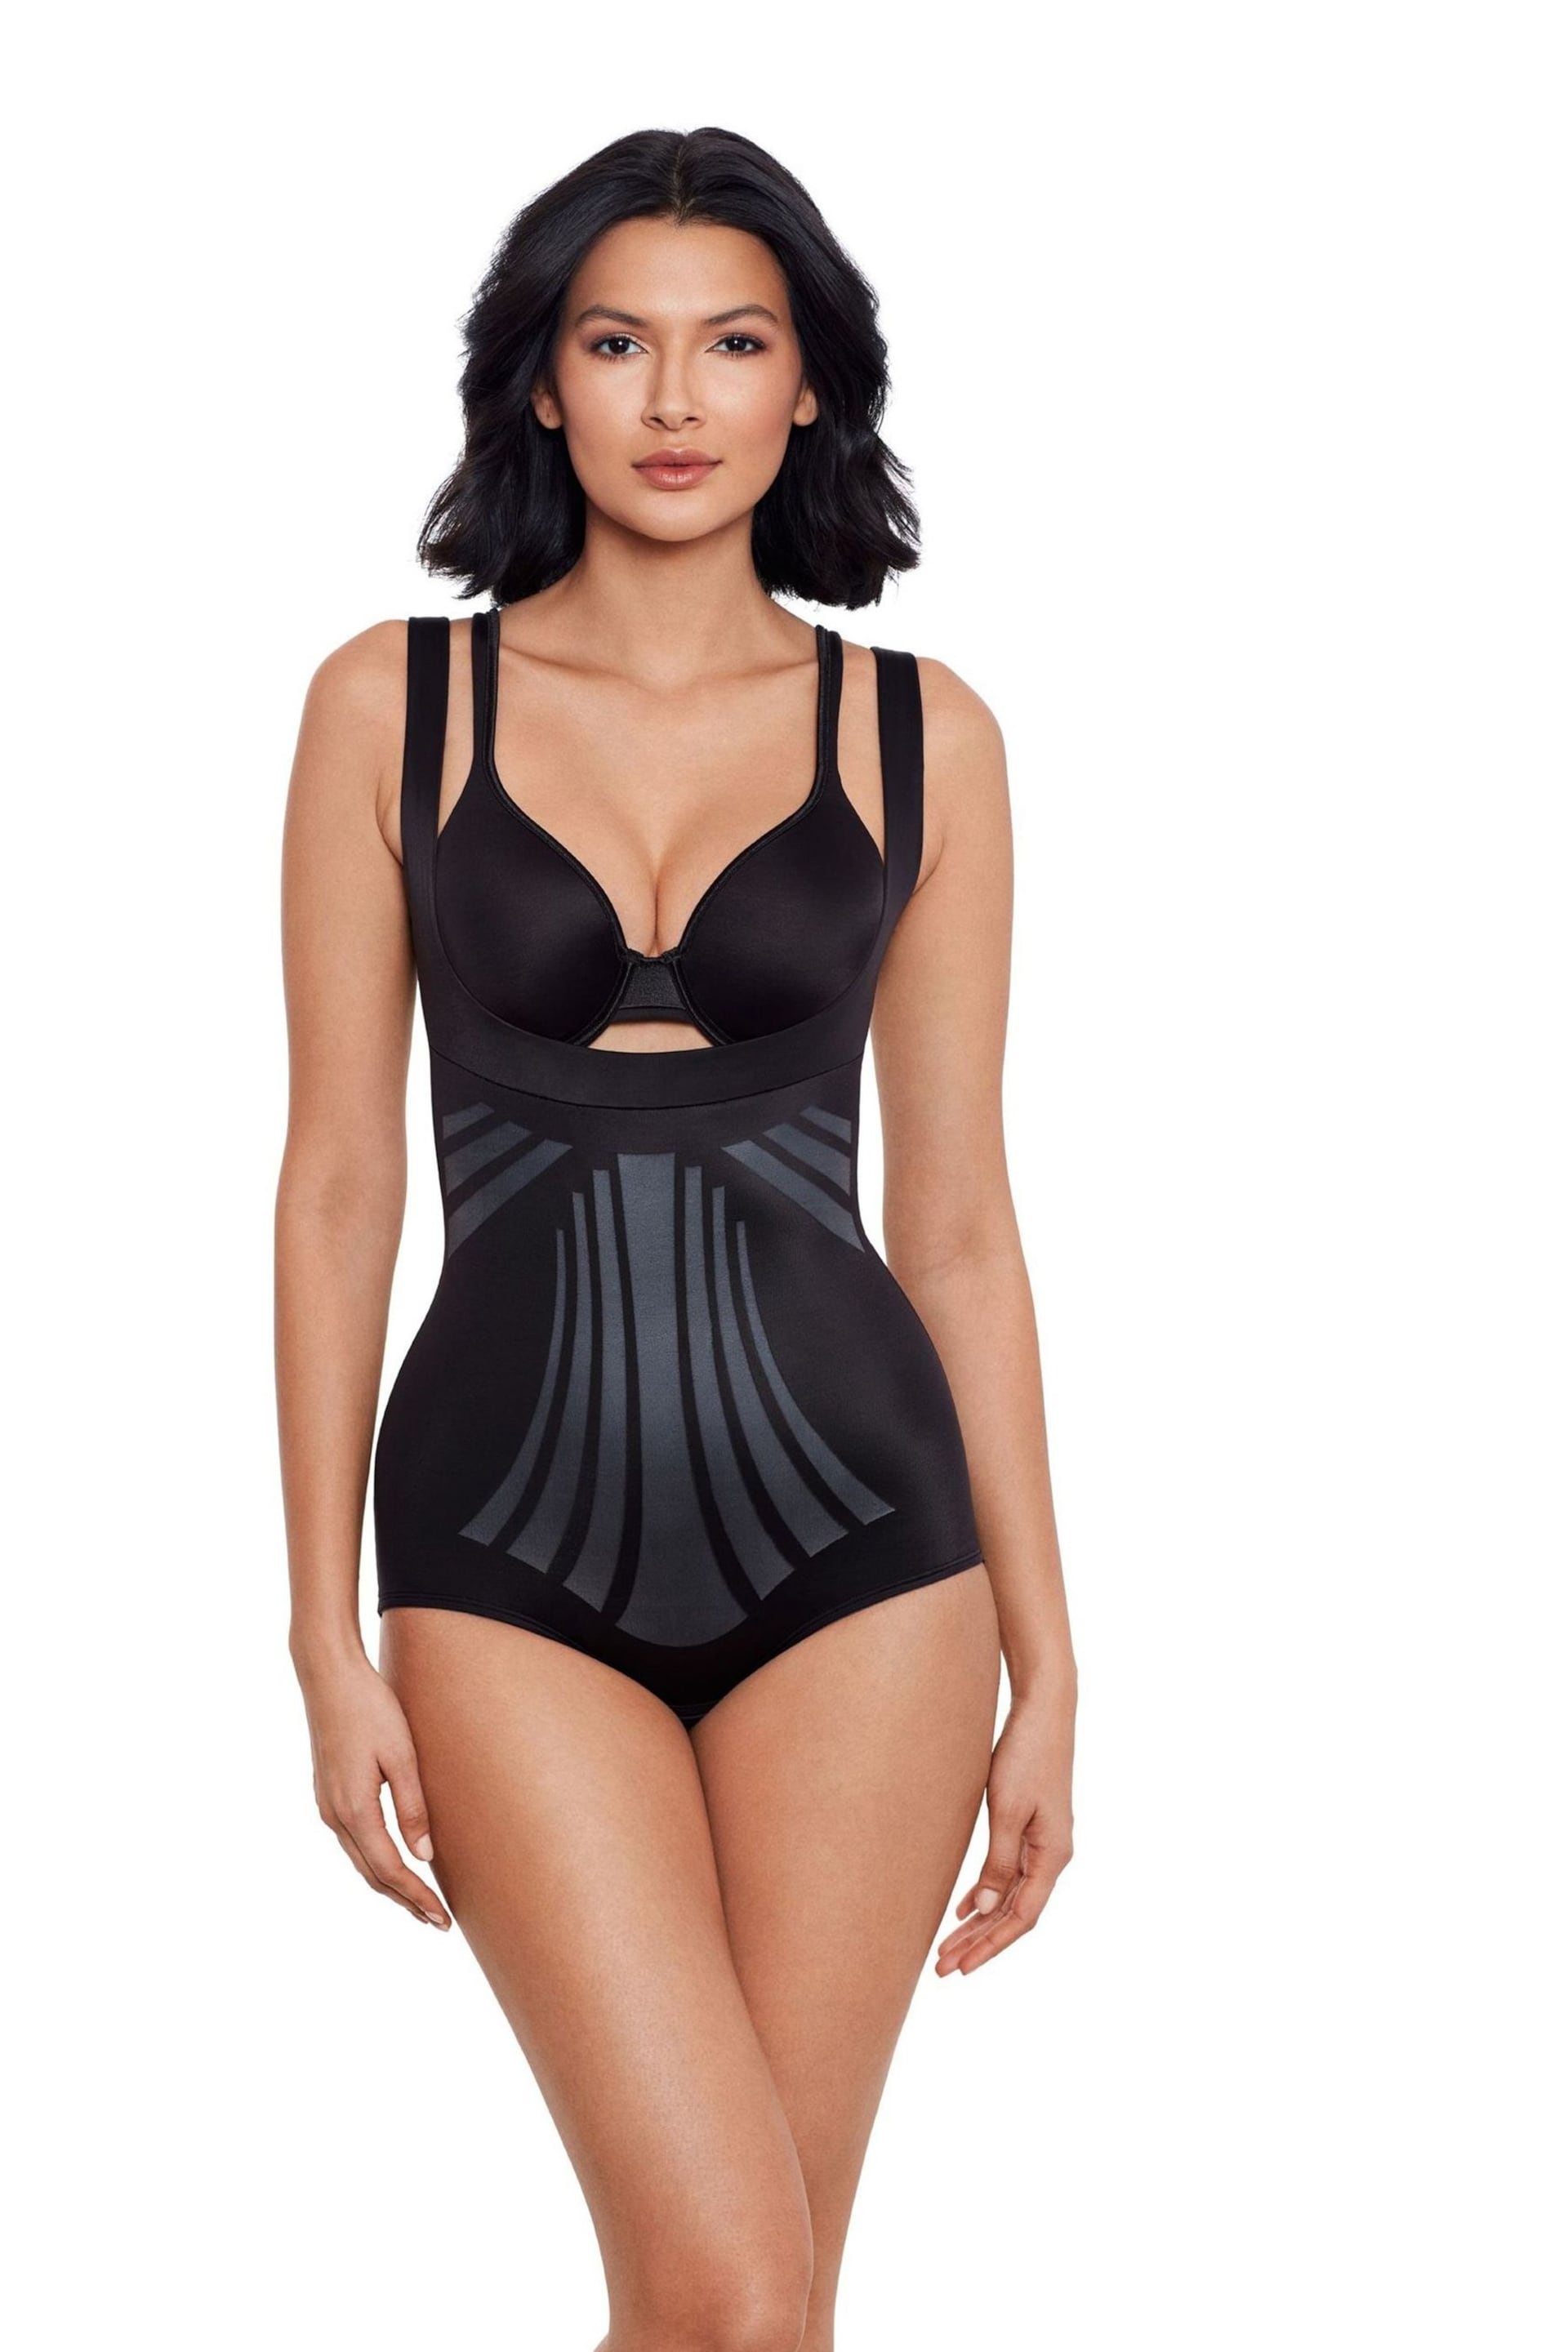 Miraclesuit Modern Miracle™ Open Bust, Wear Your Own Bra Shaping Nude Bodysuit - Image 1 of 3